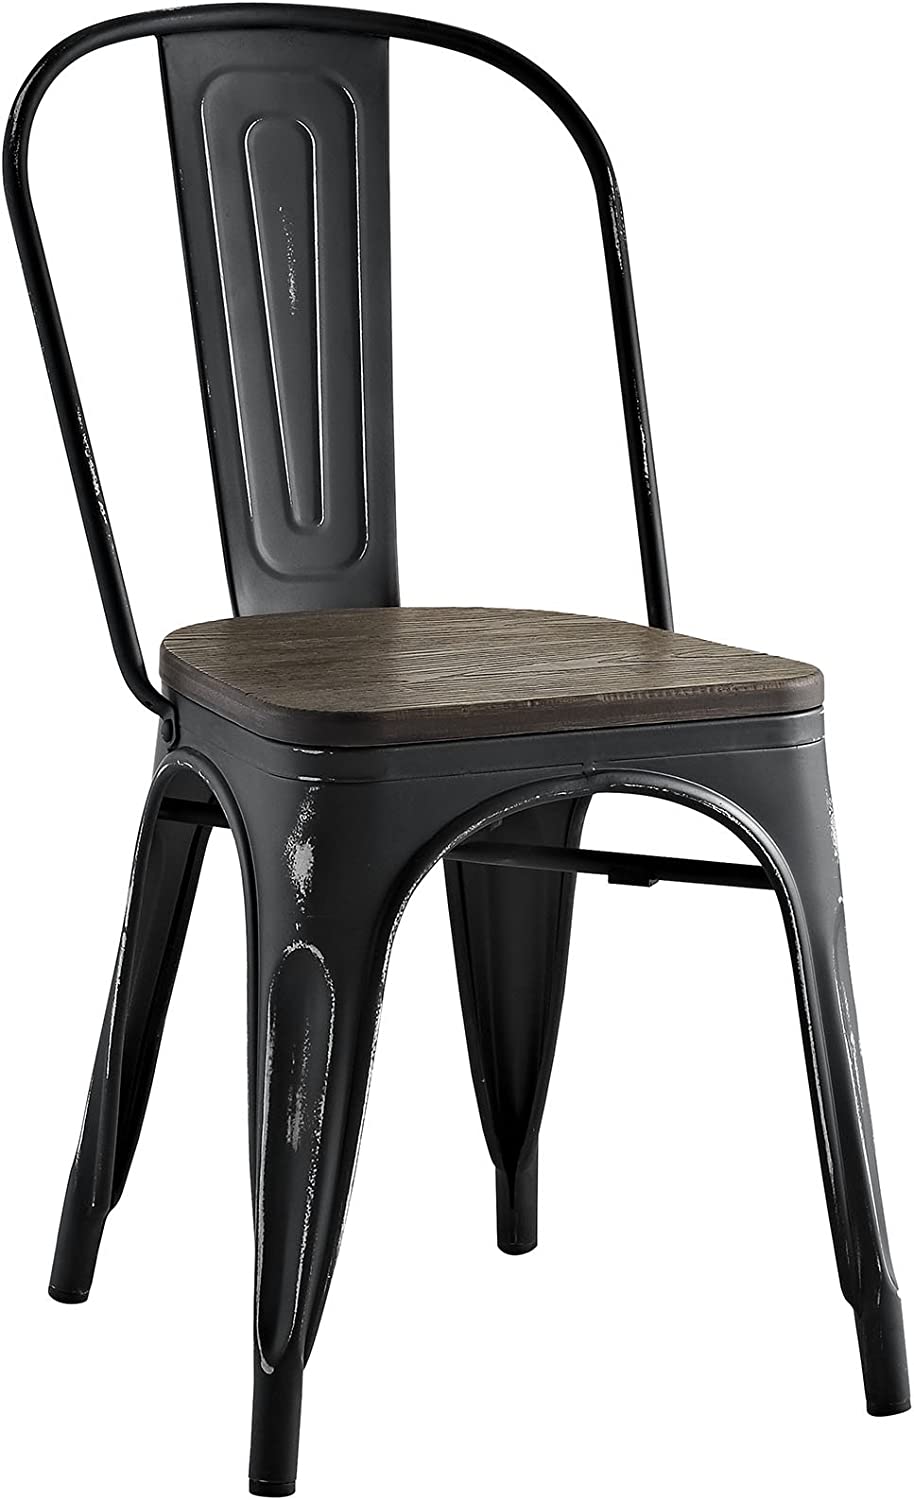 Modway Promenade Industrial Modern Steel Dining Side Chair with Bamboo Seat in Black, One